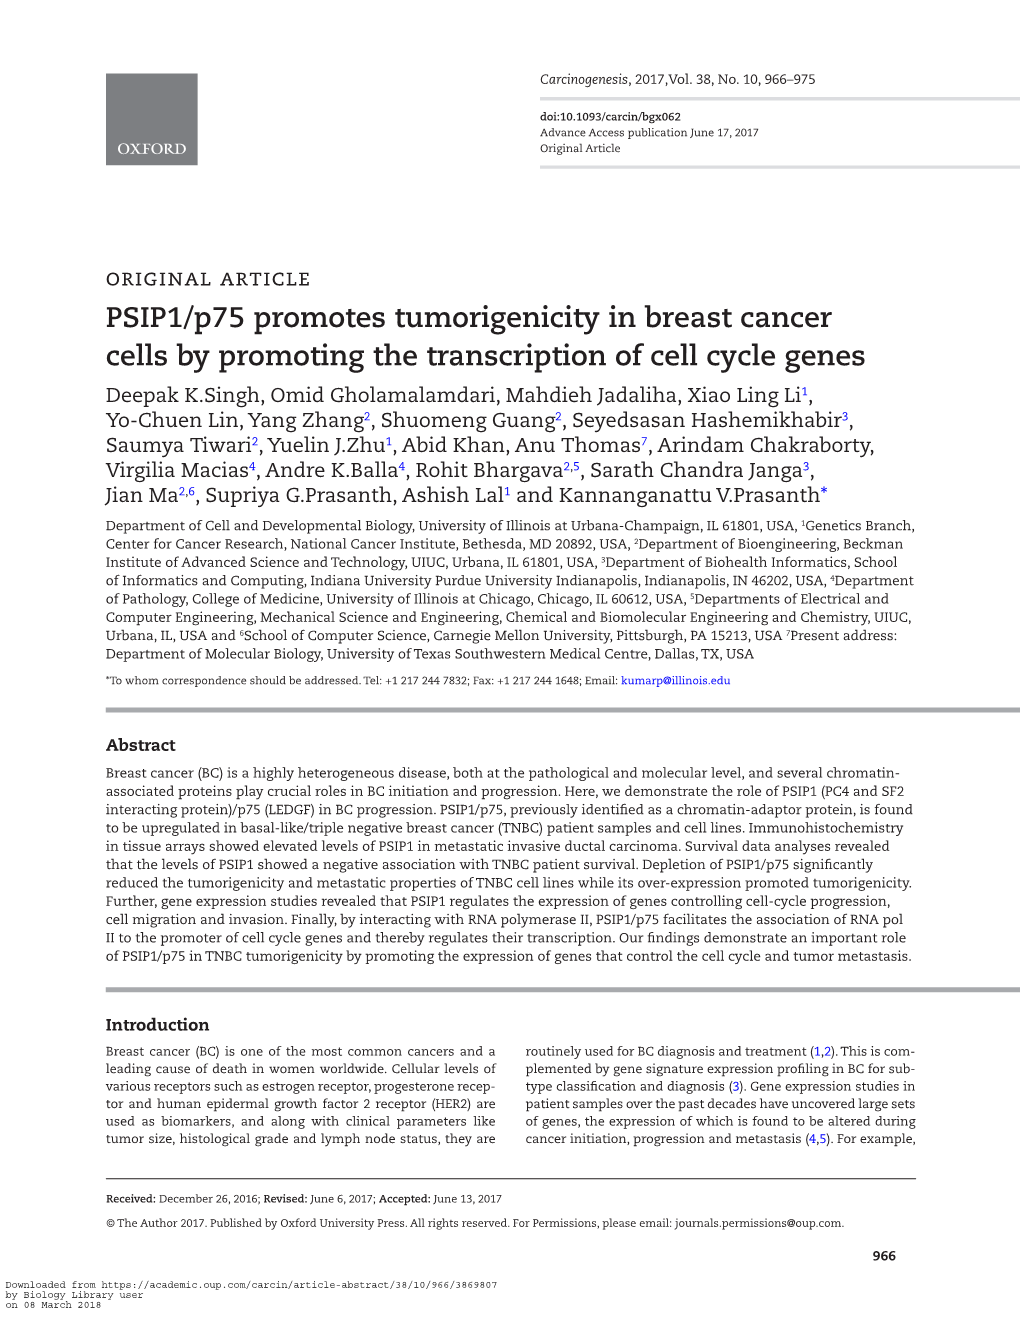 PSIP1/P75 Promotes Tumorigenicity in Breast Cancer Cells by Promoting the Transcription of Cell Cycle Genes